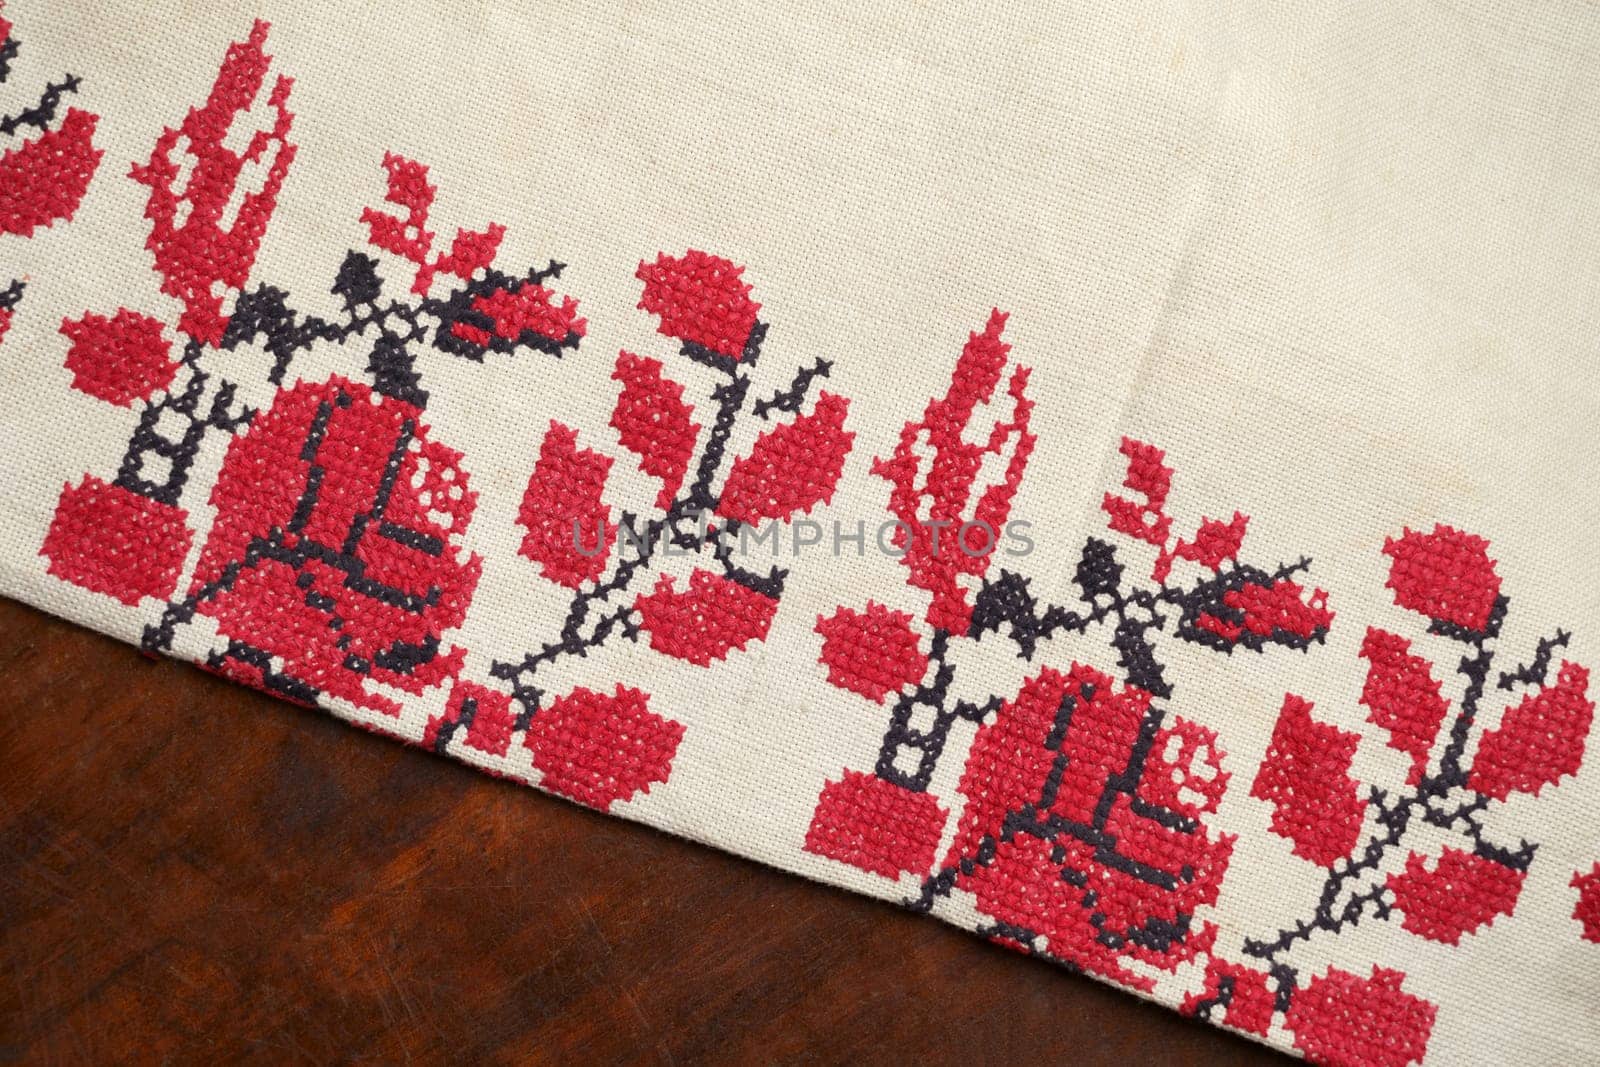 Line striped closeup weave fabric for kitchen towel material. Pinstripe fiber picnic table cloth . Black and red embroidery. Embroidered good like old handmade cross-stitch ethnic Ukraine pattern. Ukrainian rushnyk . Red version over white background. Beige white farmhouse style stripes texture. Woven linen cloth pattern background. by aprilphoto